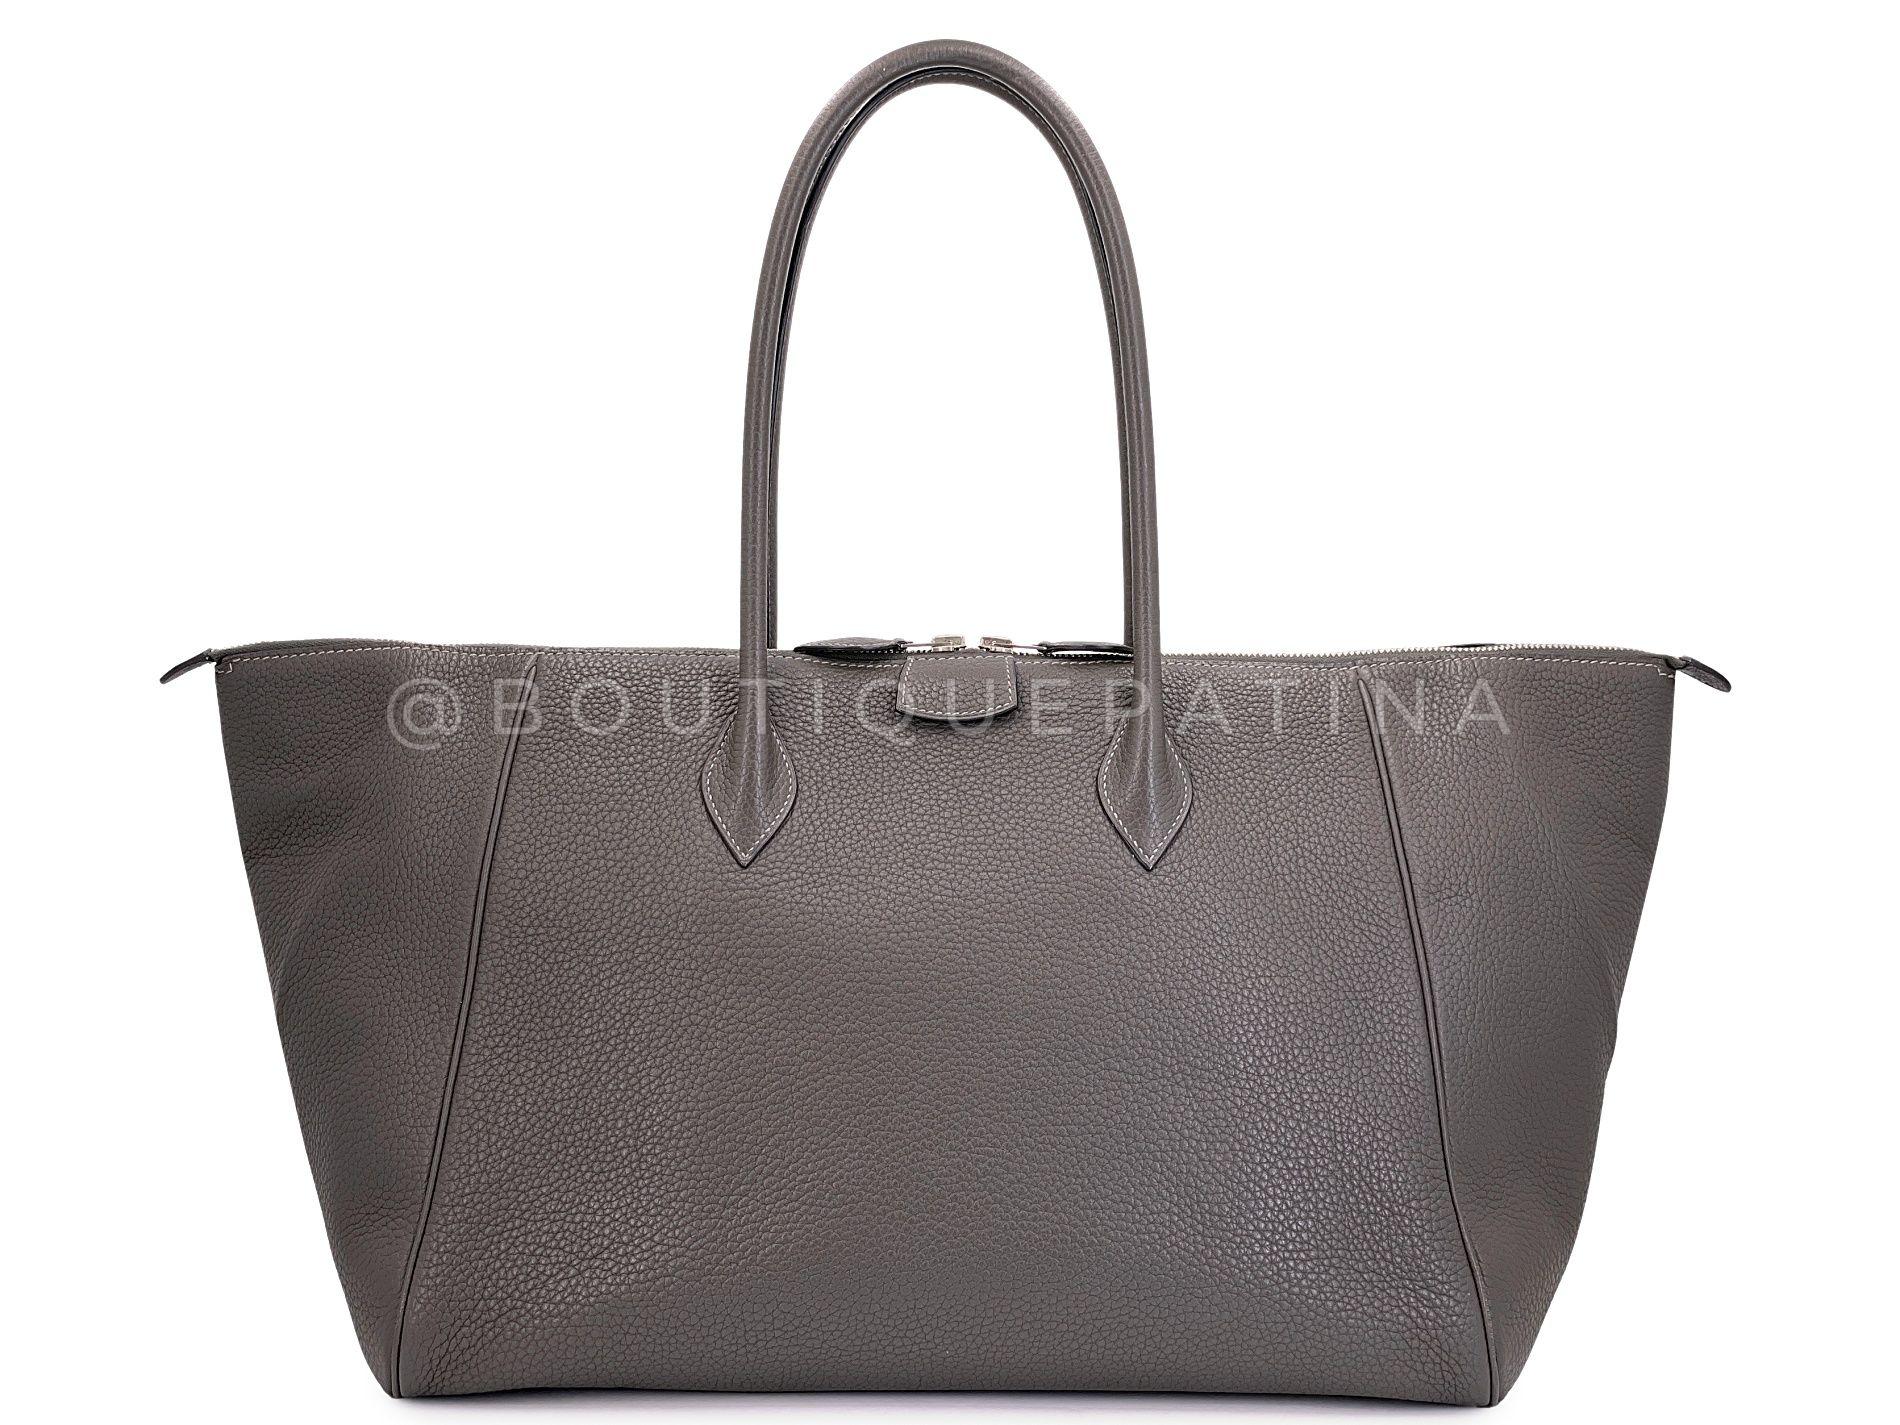 Store item: 68061
Hard to find, especially in this condition, is this beautiful Hermès Etoupe Clemence Paris Bombay 37 Tote Bag PHW Taupe.

This bag is set apart from the rest of the Paris Bombay models due to its versatility and style - the longer